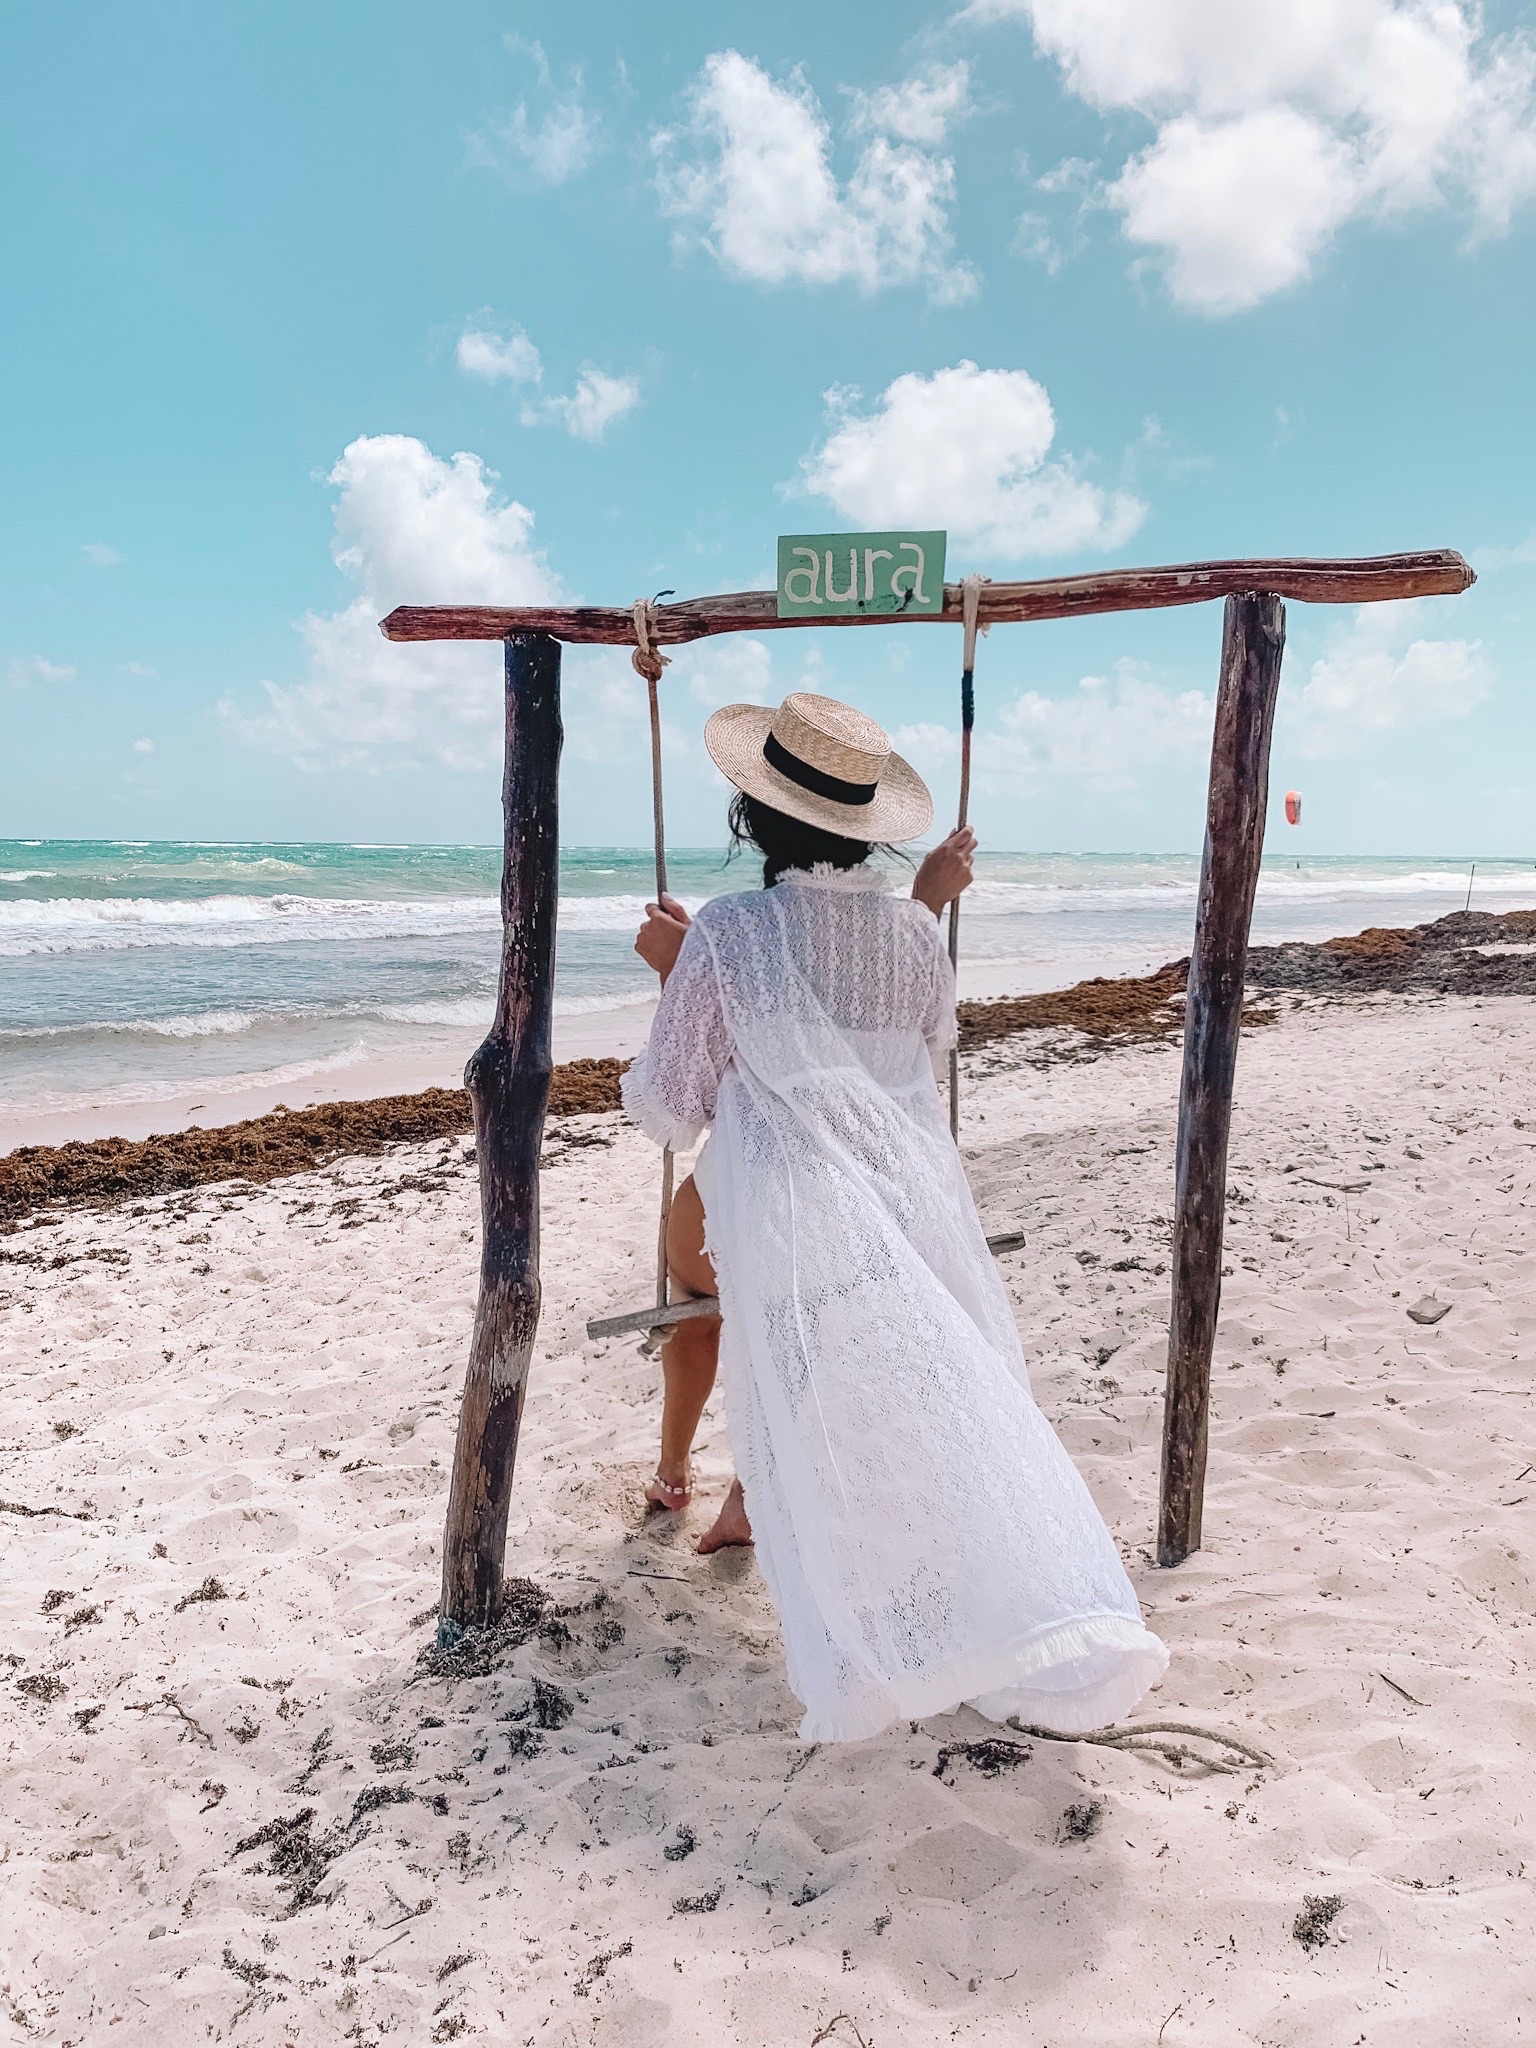 Tulum Travel Guide - Where to Stay in Tulum Mexico Hotels